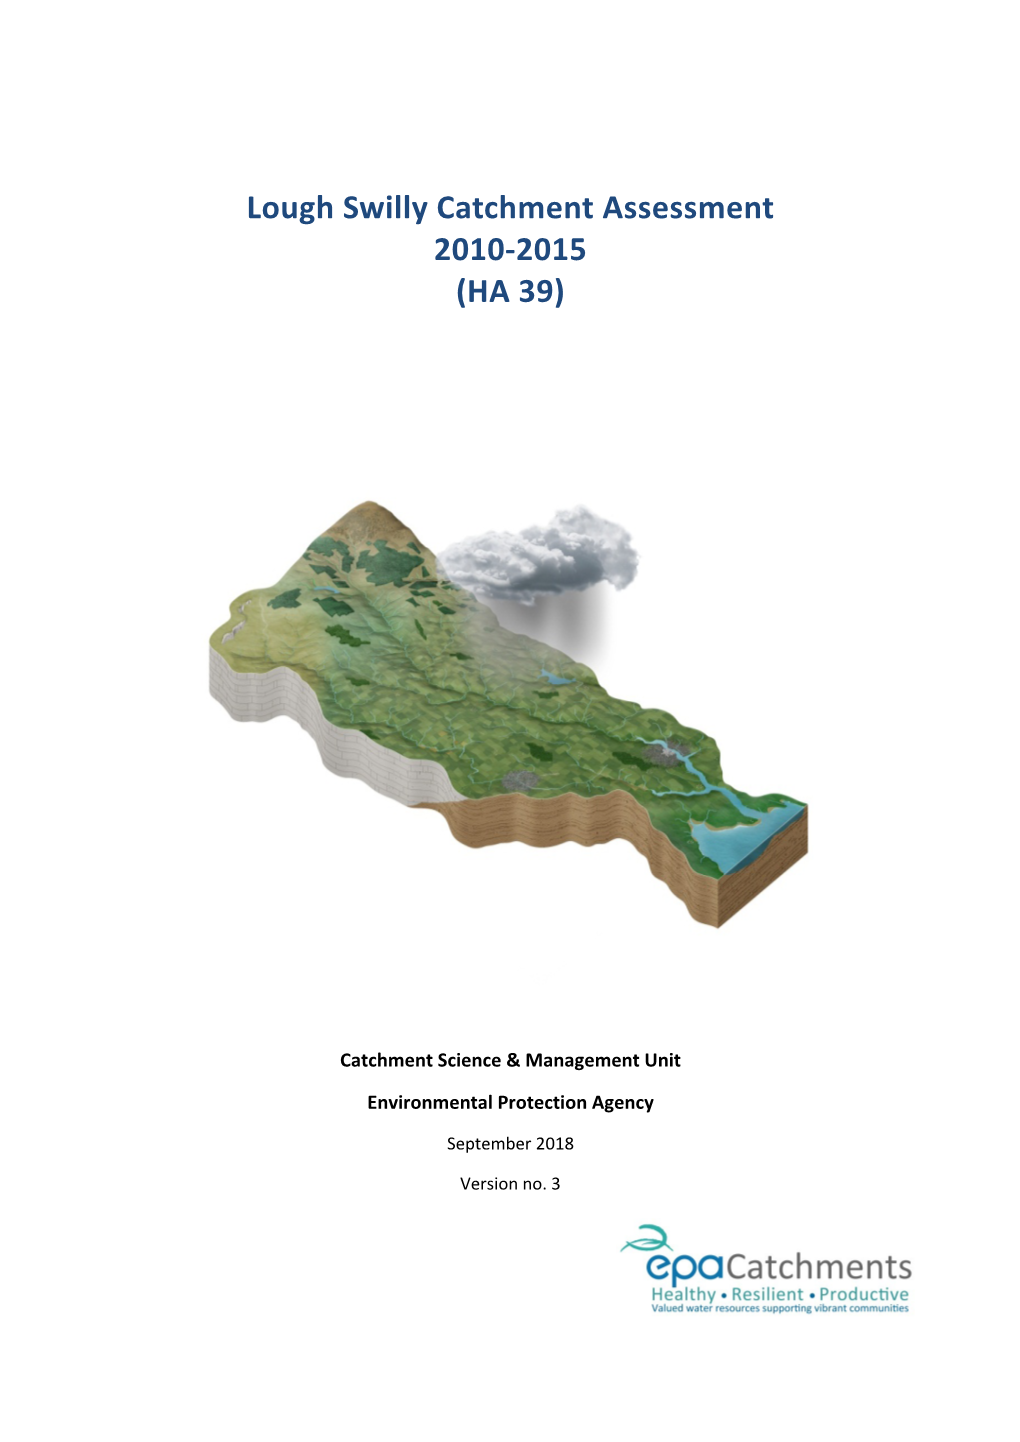 Lough Swilly Catchment Assessment 2010-2015 (HA 39)